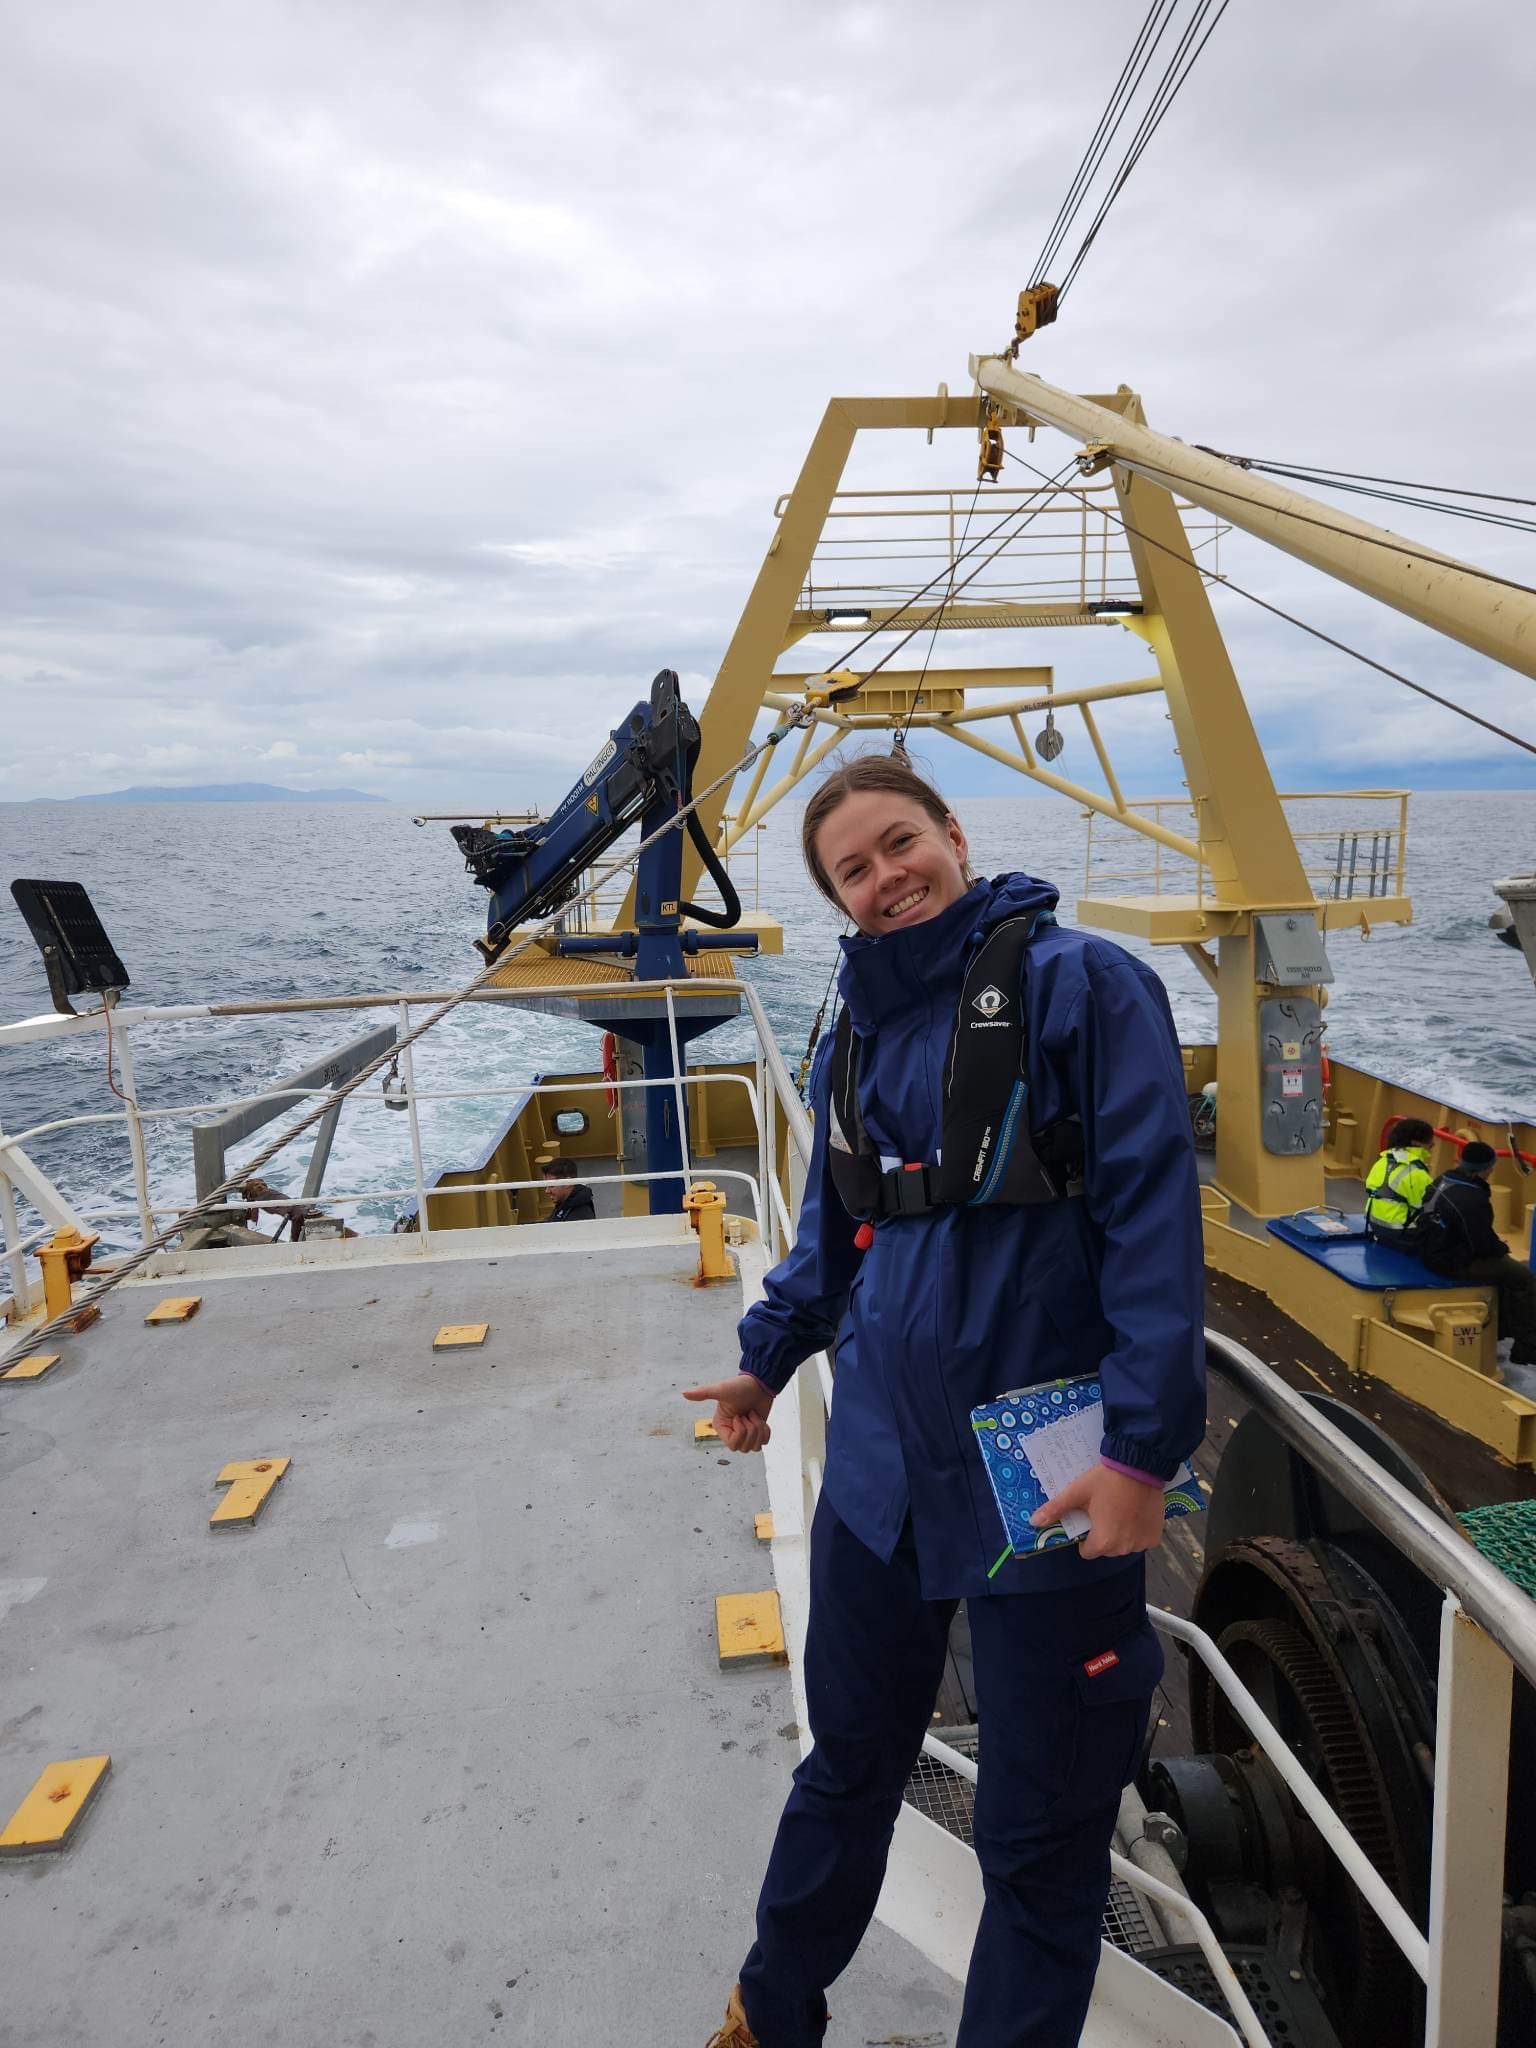 Bachelor of Maritime Engineering student Cameron Skeggs in foul-weather gear, on the deck of a ship, out on the water during one of her hands-on naval architecture assignments.